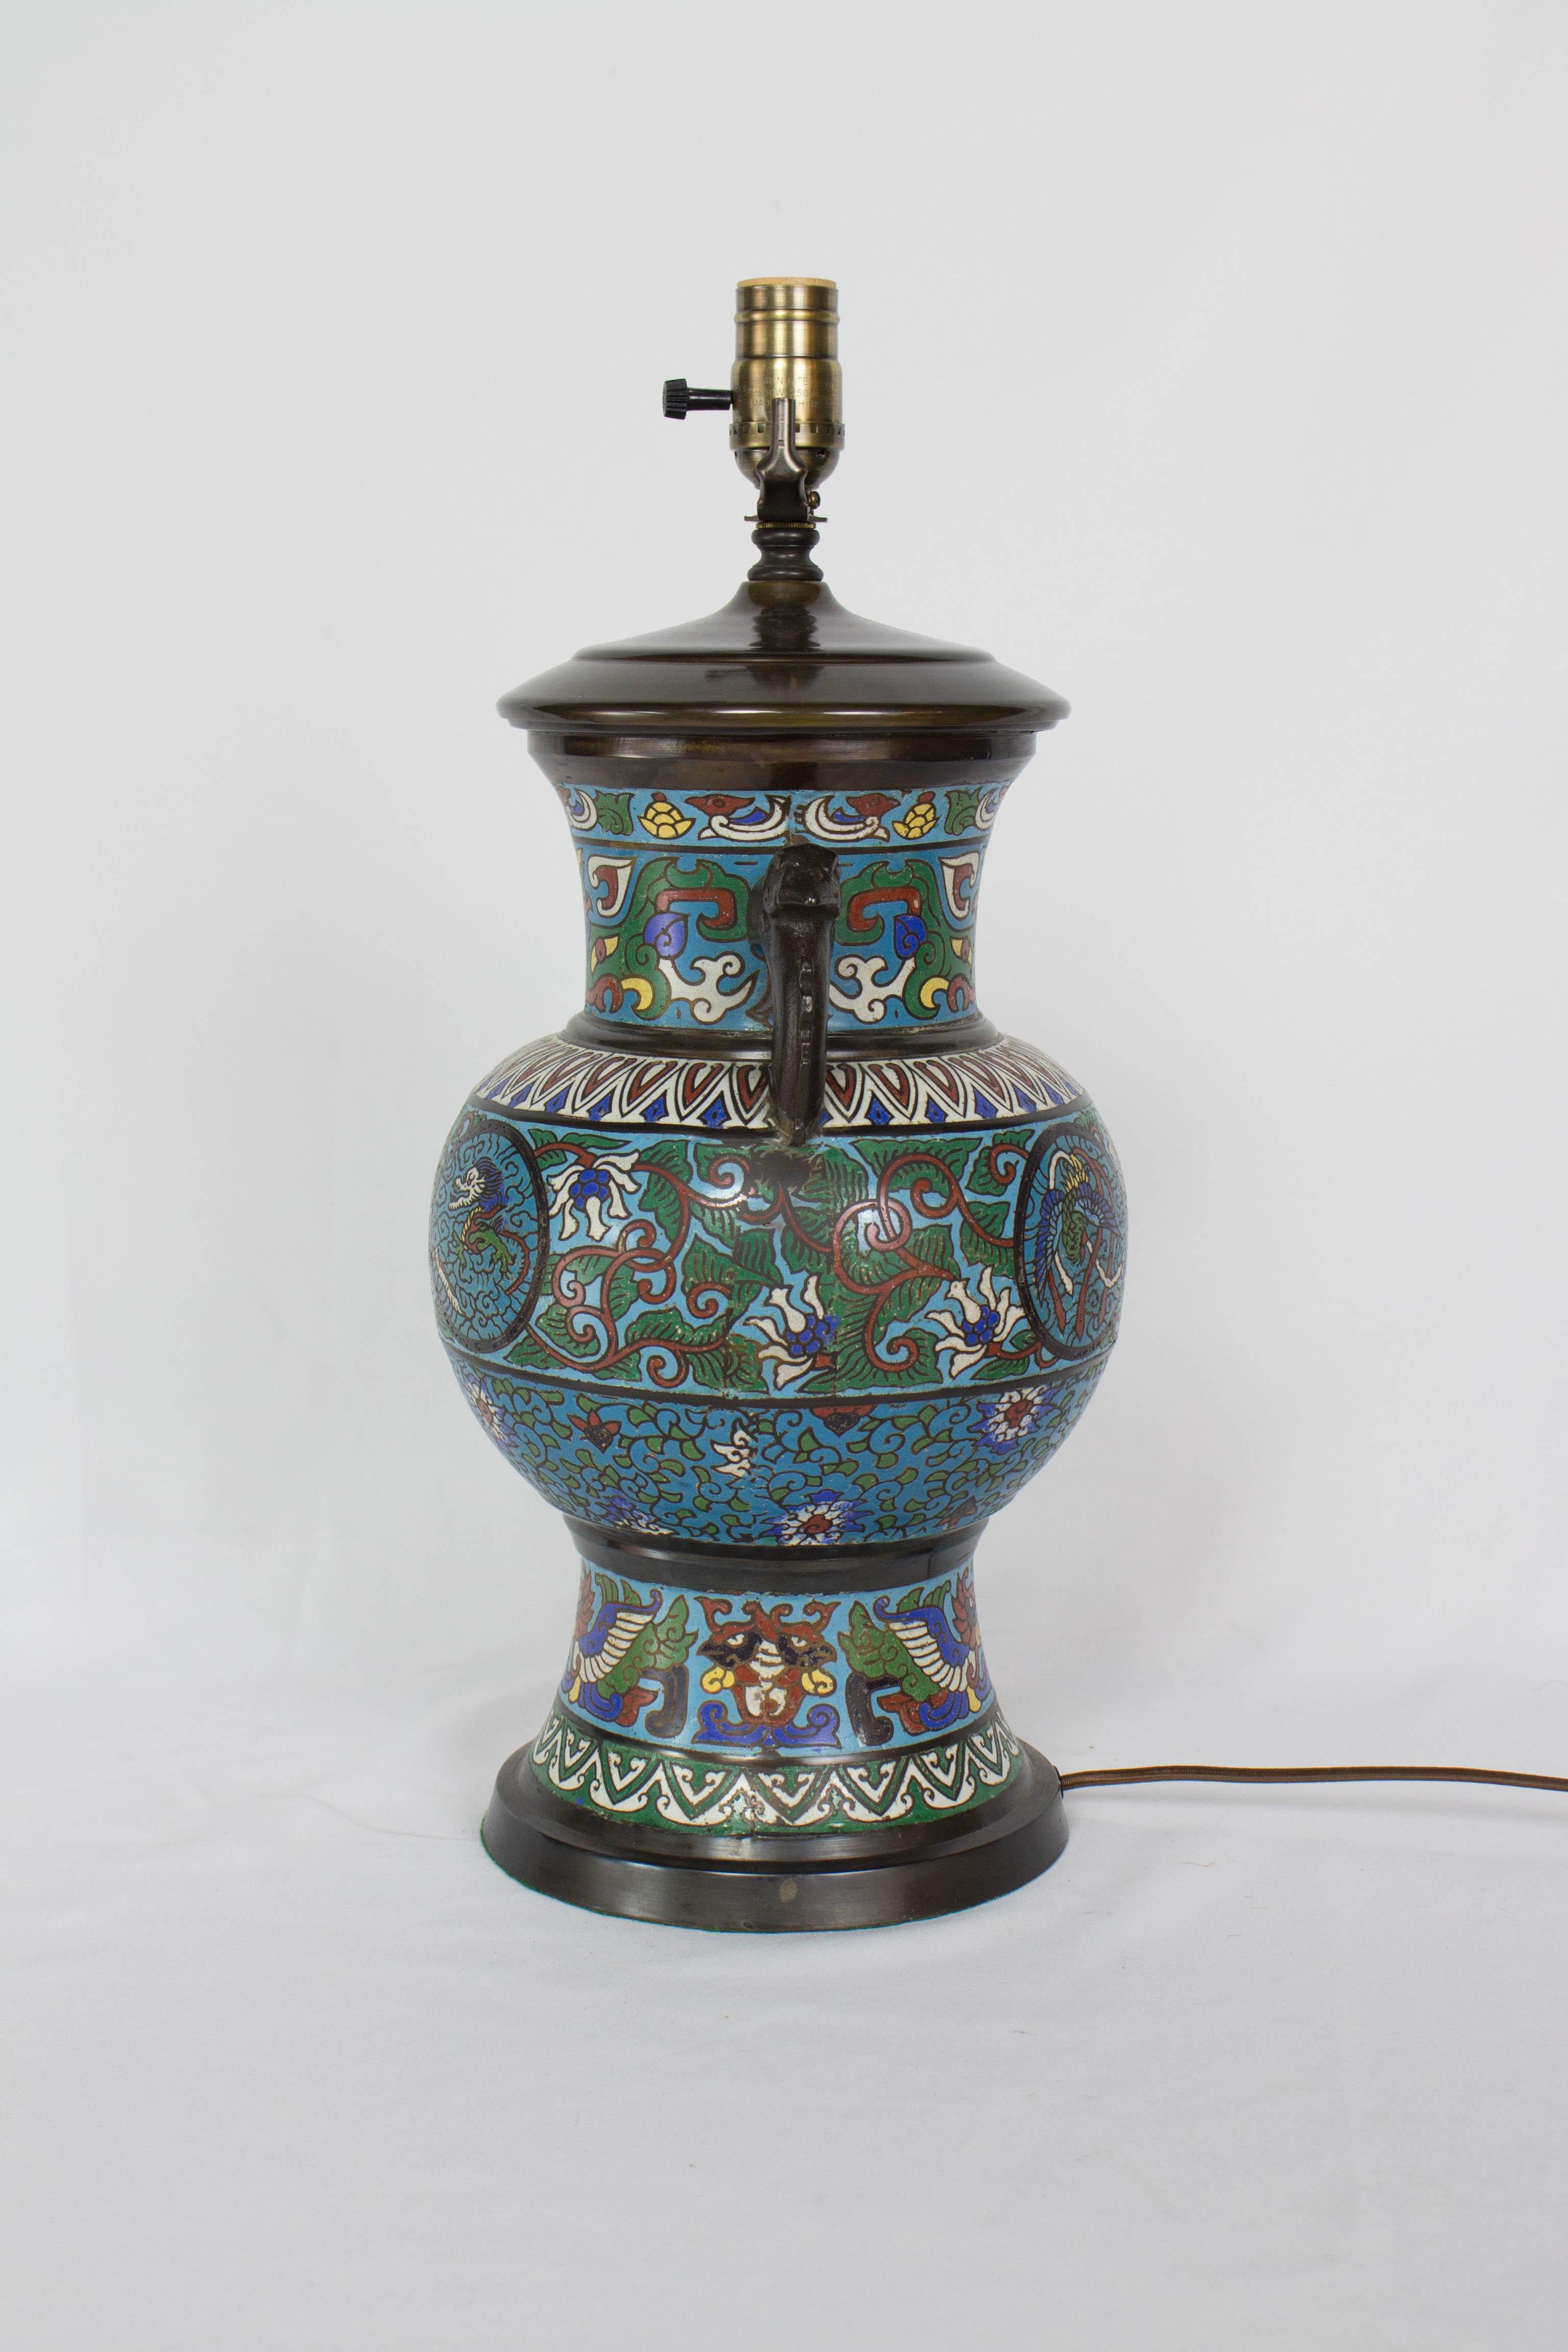 Late 19th Century Champleve Table Lamp In Good Condition For Sale In Canton, MA